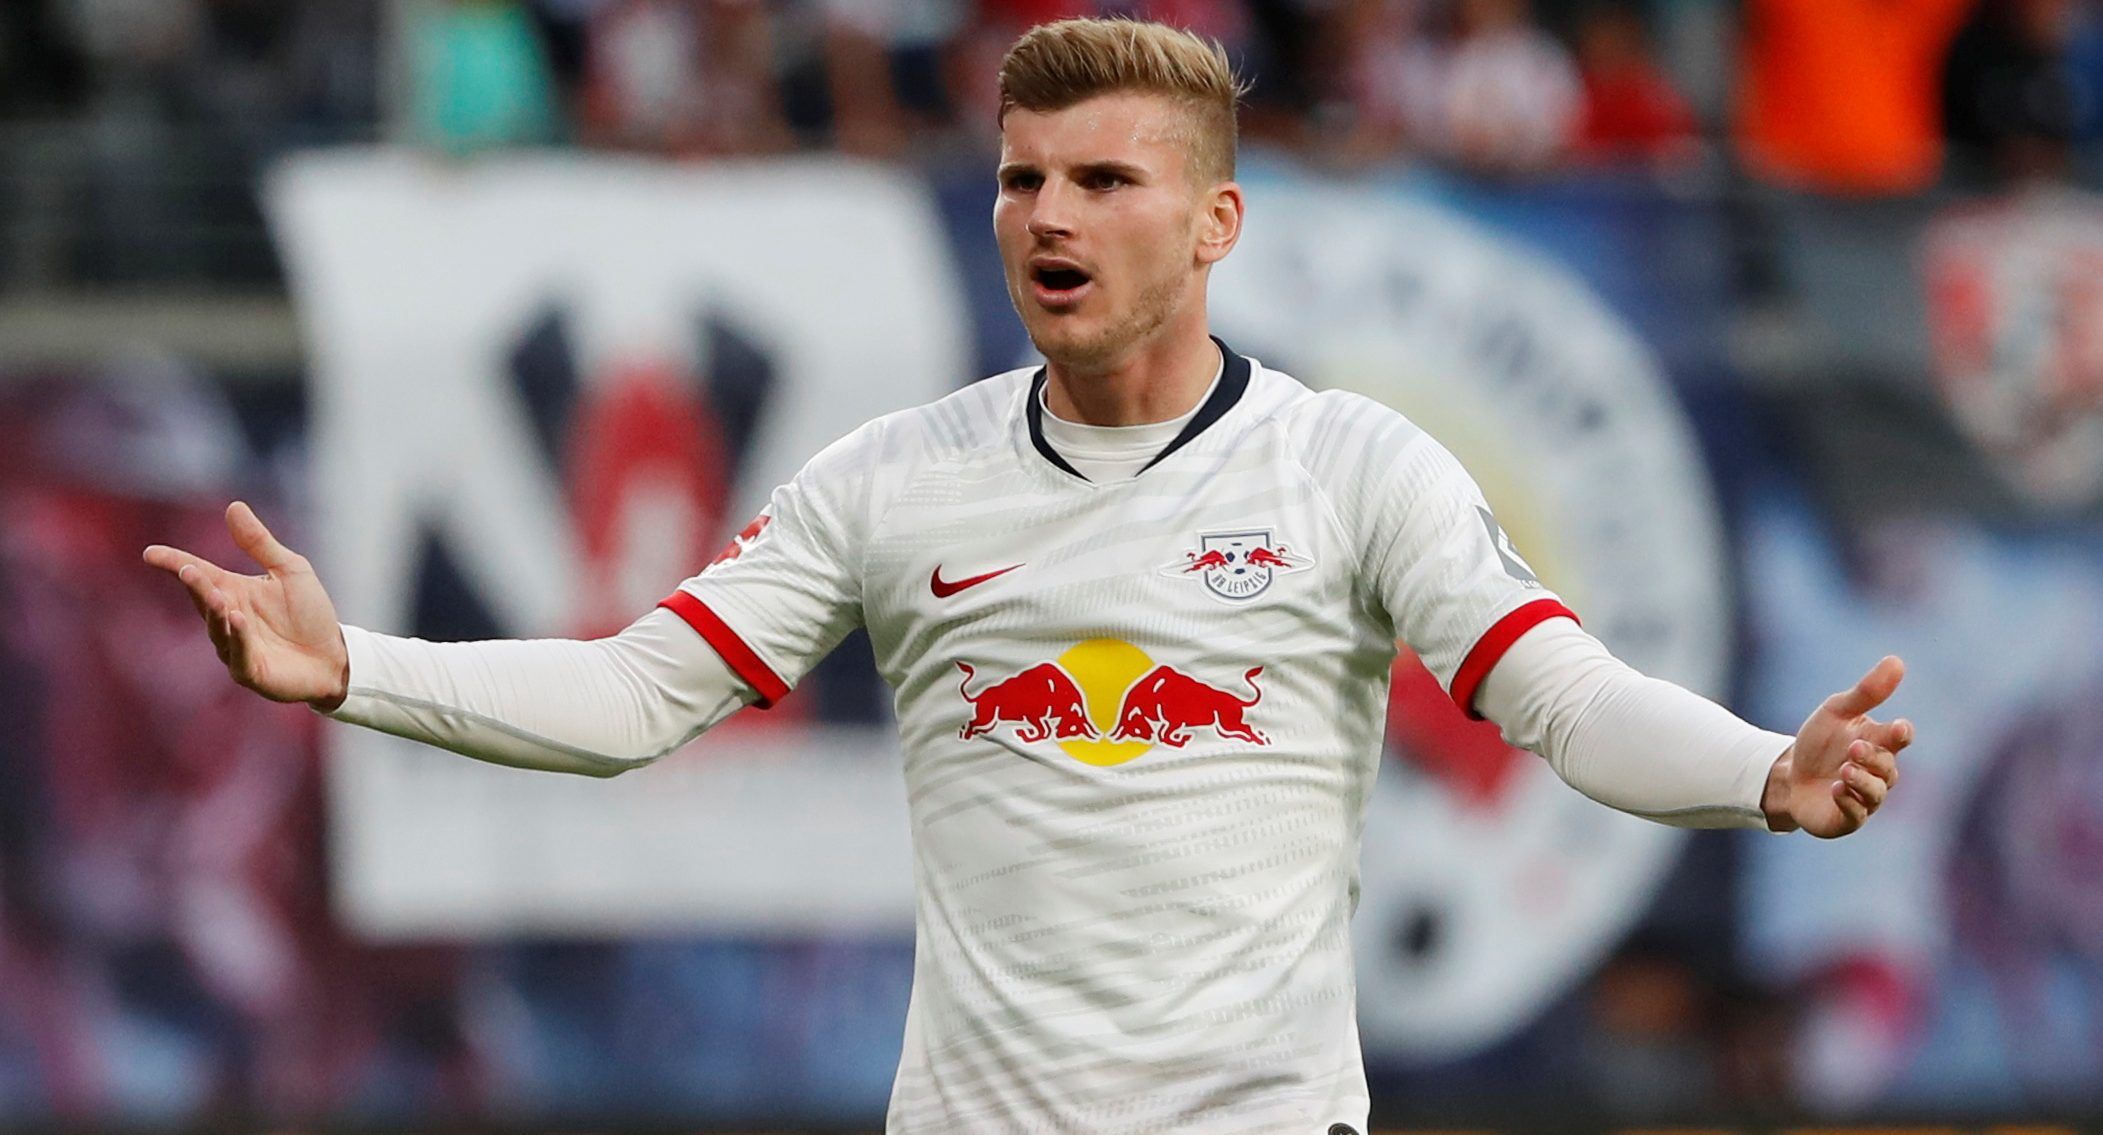 Soccer Football - Bundesliga - RB Leipzig v Bayern Munich - Red Bull Arena, Leipzig, Germany - September 14, 2019  RB Leipzig's Timo Werner reacts  REUTERS/Fabrizio Bensch  DFL regulations prohibit any use of photographs as image sequences and/or quasi-video